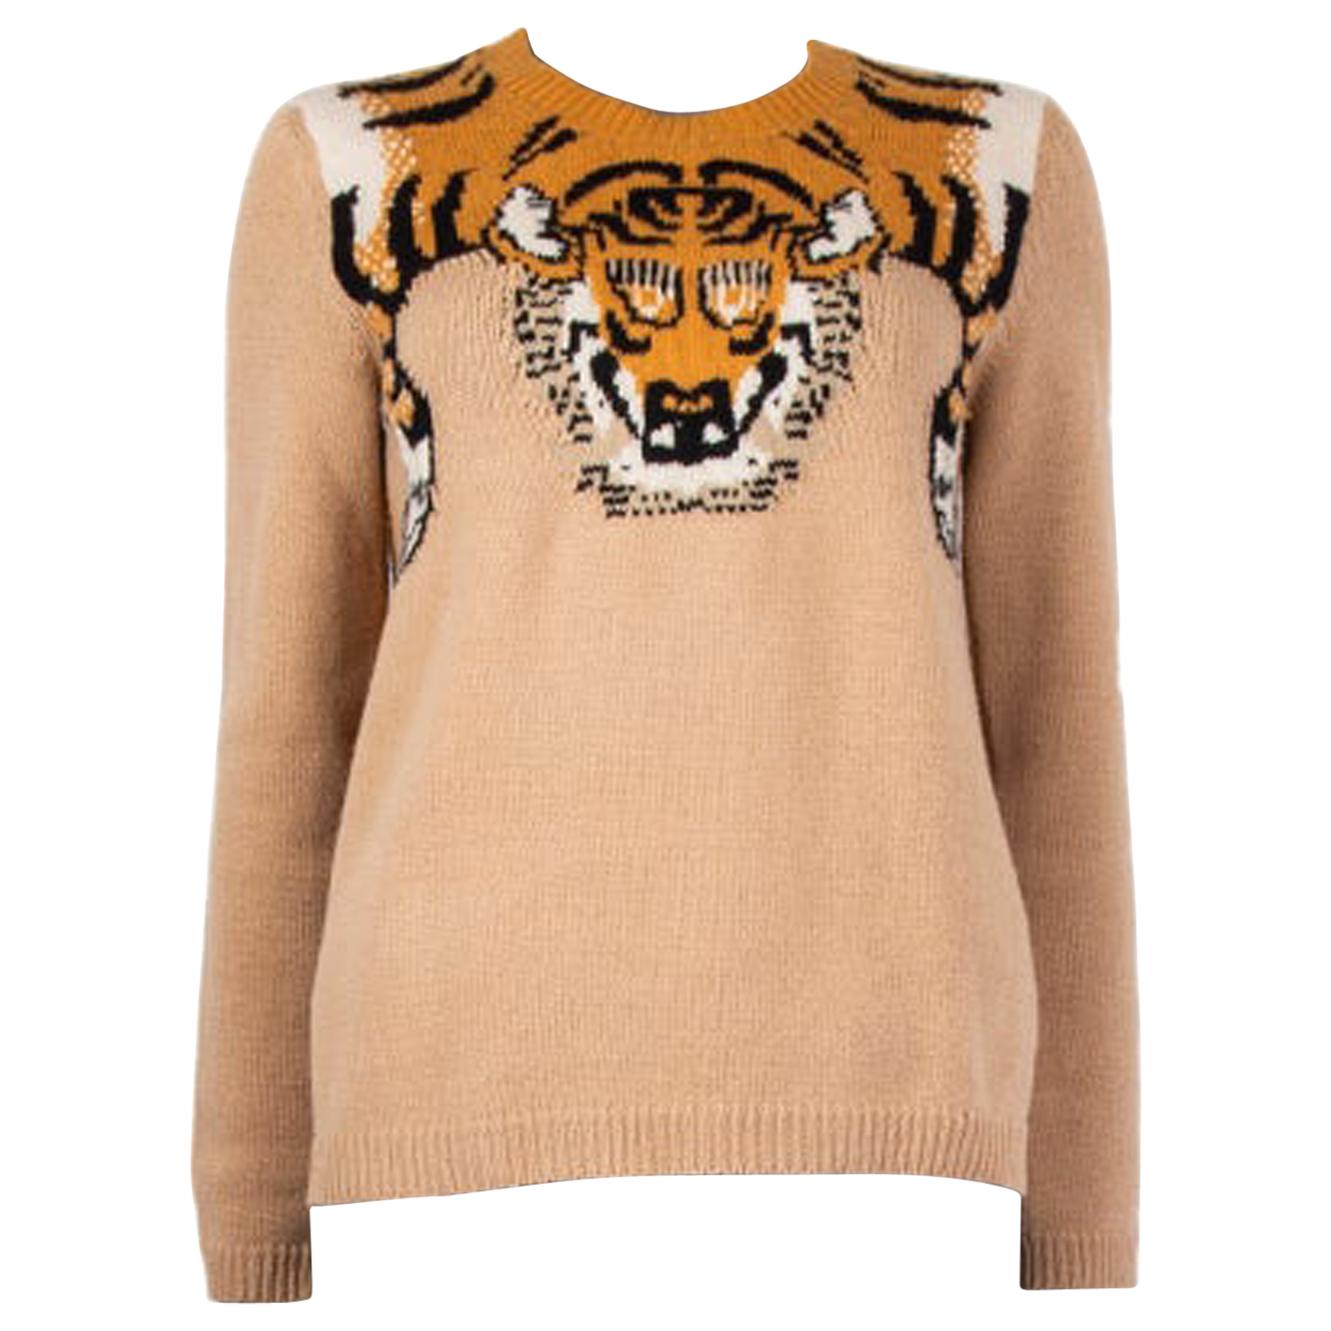 Gucci Tiger Sweater - 3 For Sale on 1stDibs | gucci tiger cardigan 